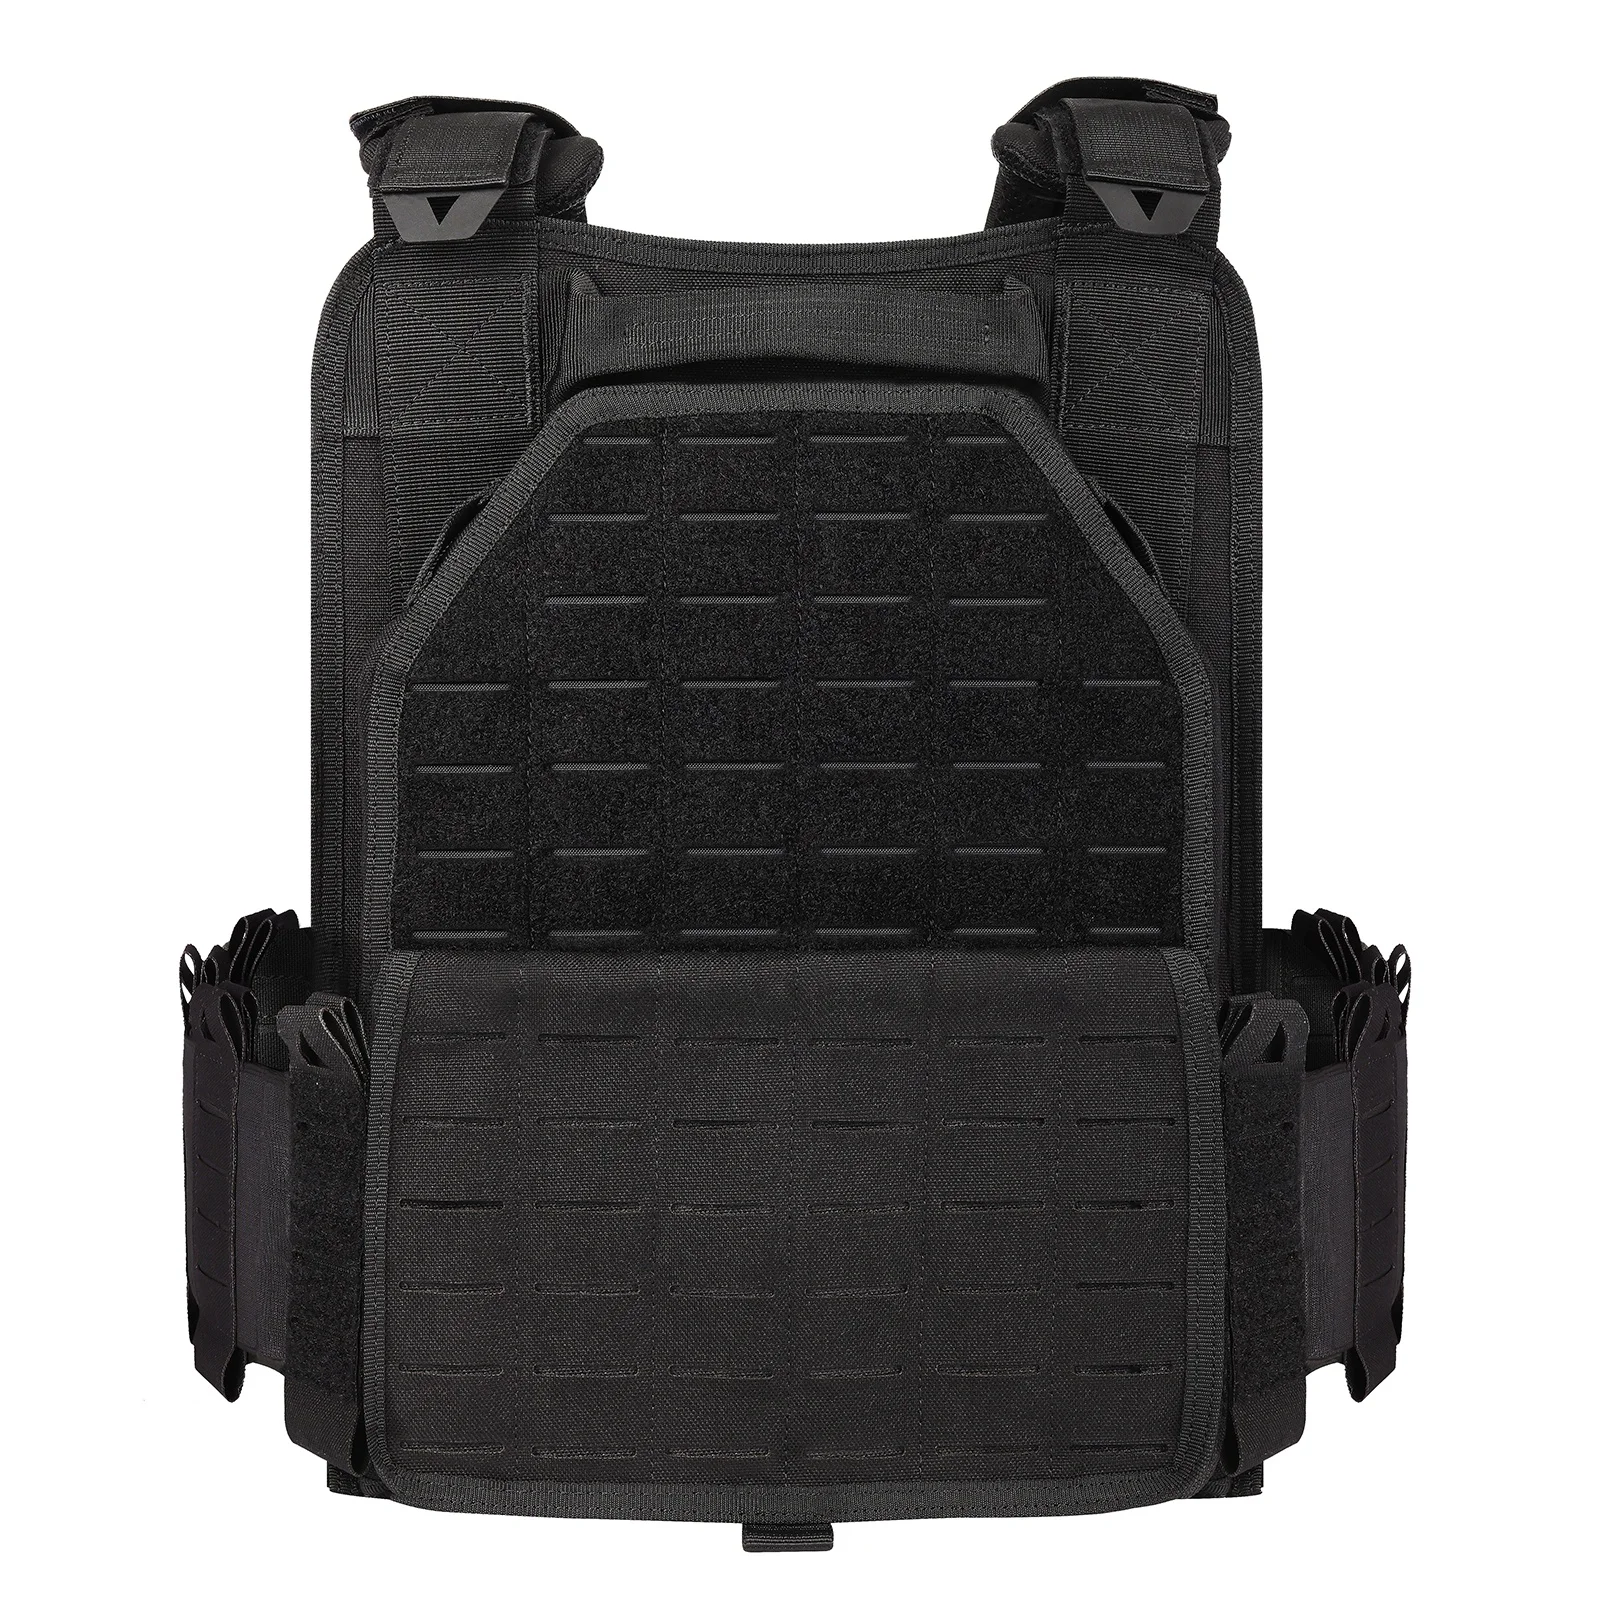 YAKEDA Light Weight Quick Release SWAT Combat Plate Carrier 1000D Nylon Molle Chaleco Tactico Military Tactical Vest